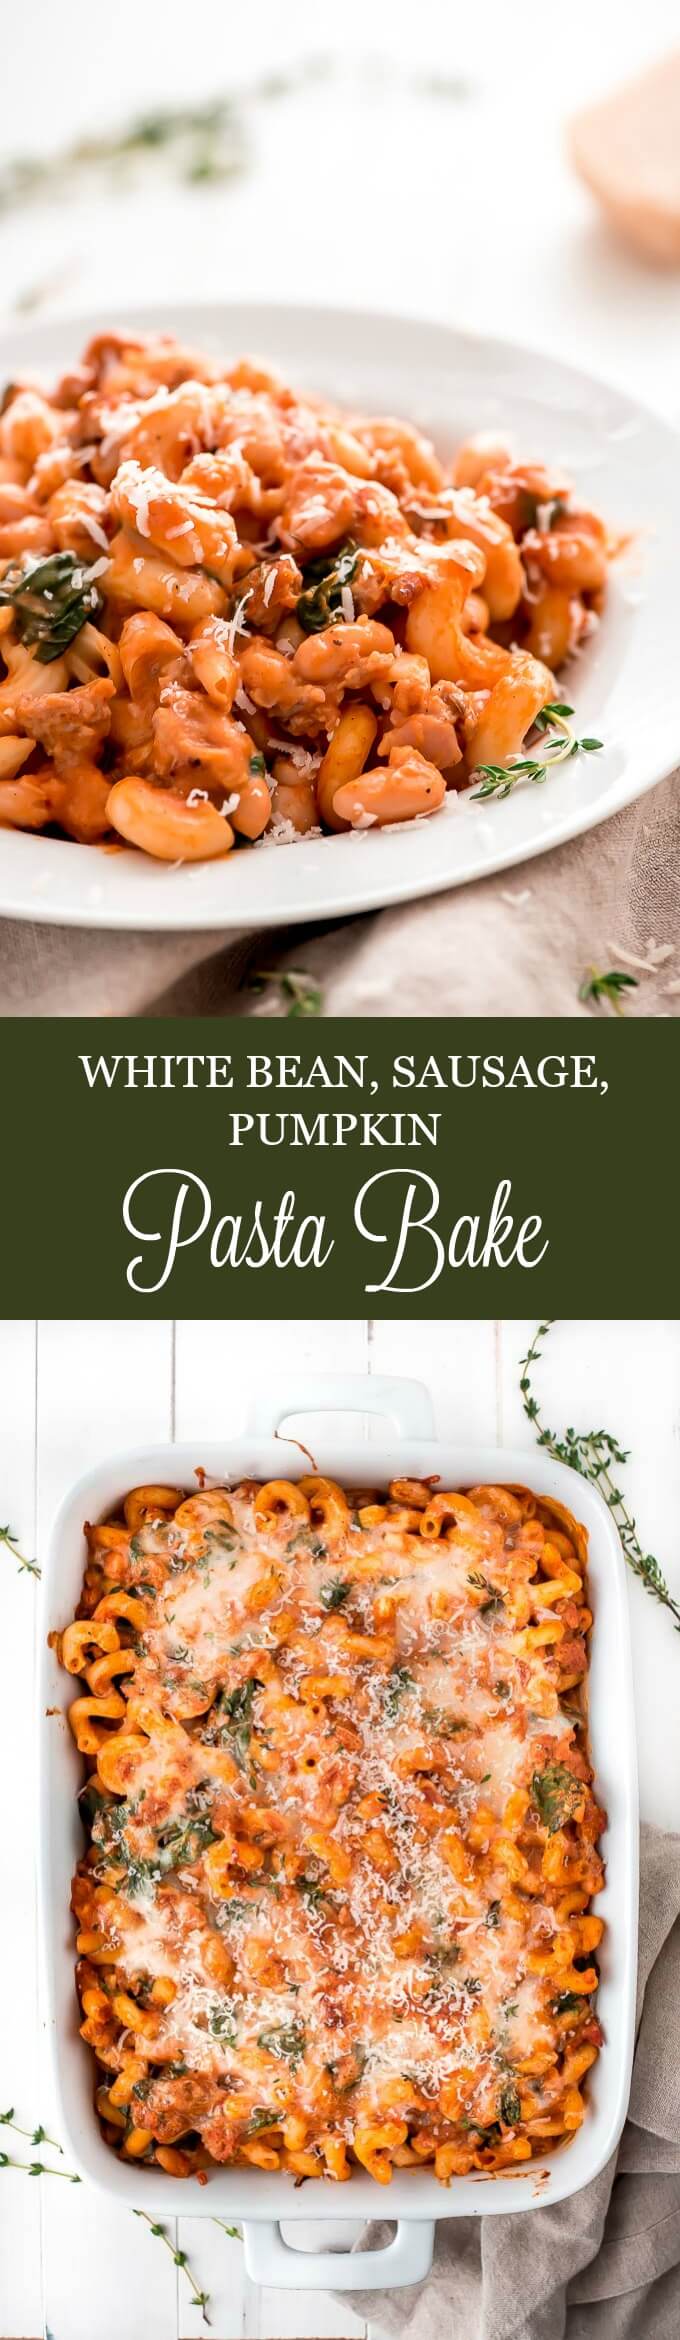 Enjoy the flavors of fall in this comforting, protein and fiber filled White Bean, Sausage, Pumpkin Pasta Bake. Pumpkin never tasted so creamy!